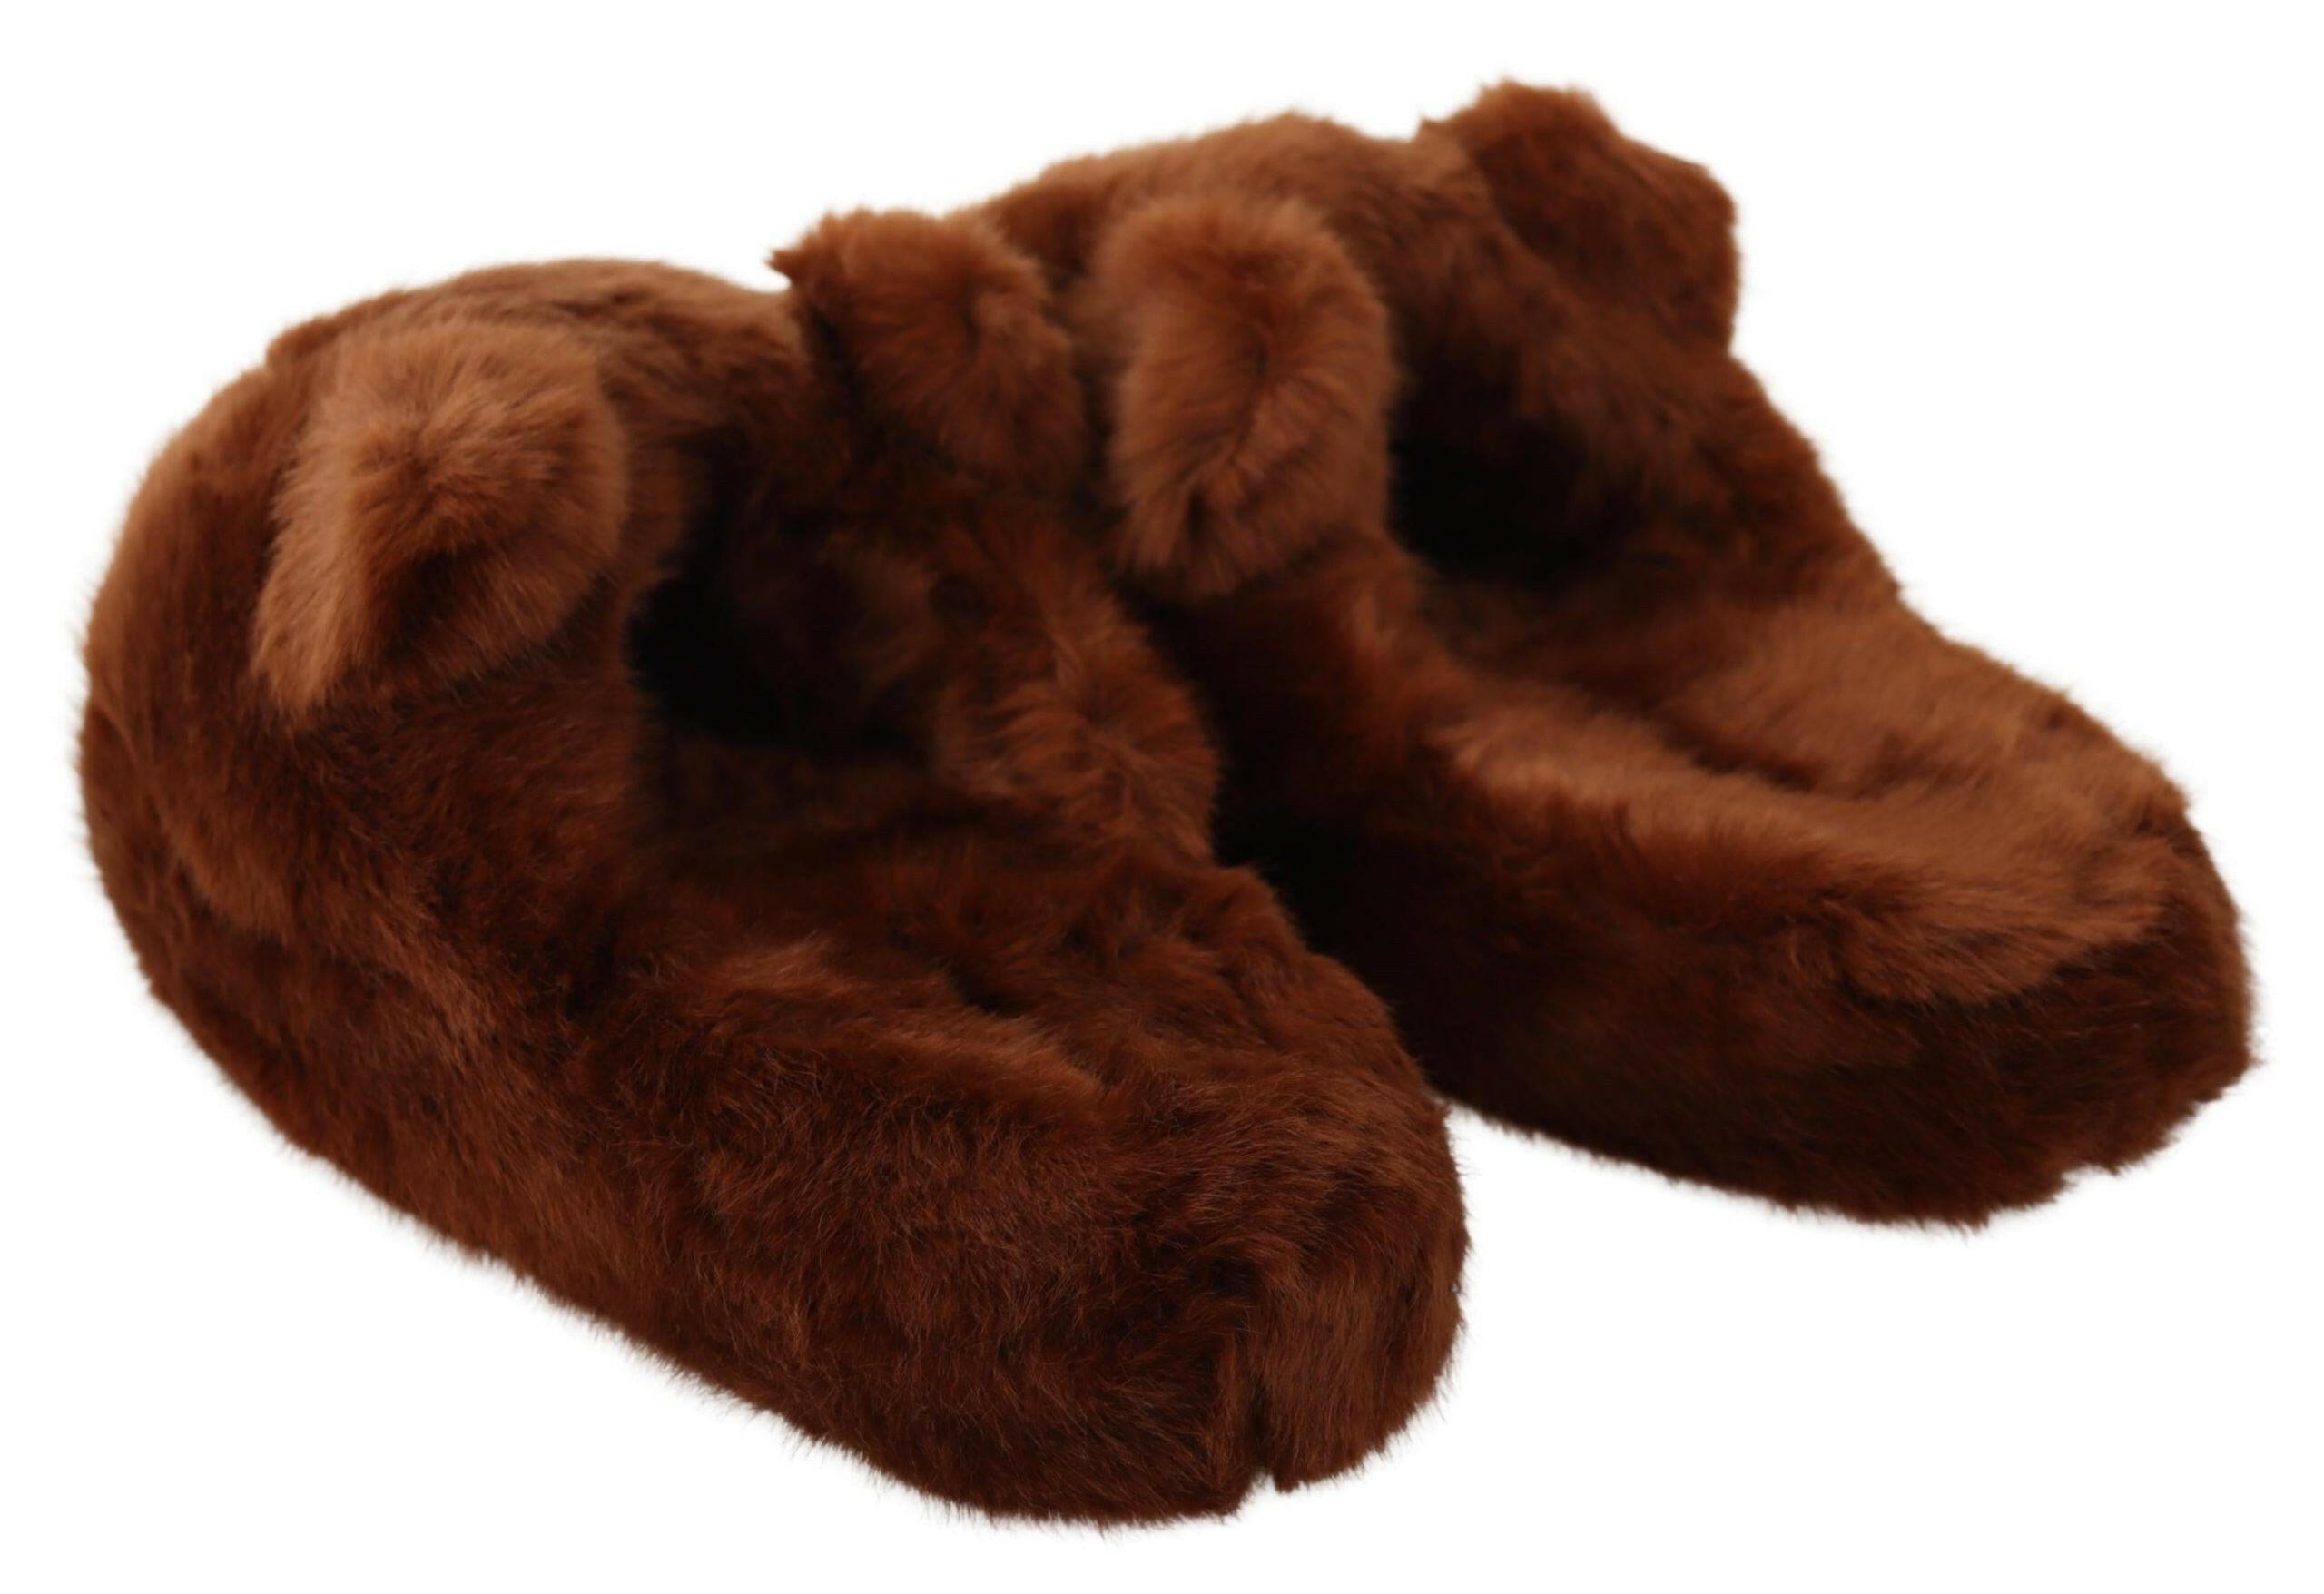 Dolce & Gabbana Brown Teddy Bear Slippers Sandals Shoes - GENUINE AUTHENTIC BRAND LLC  